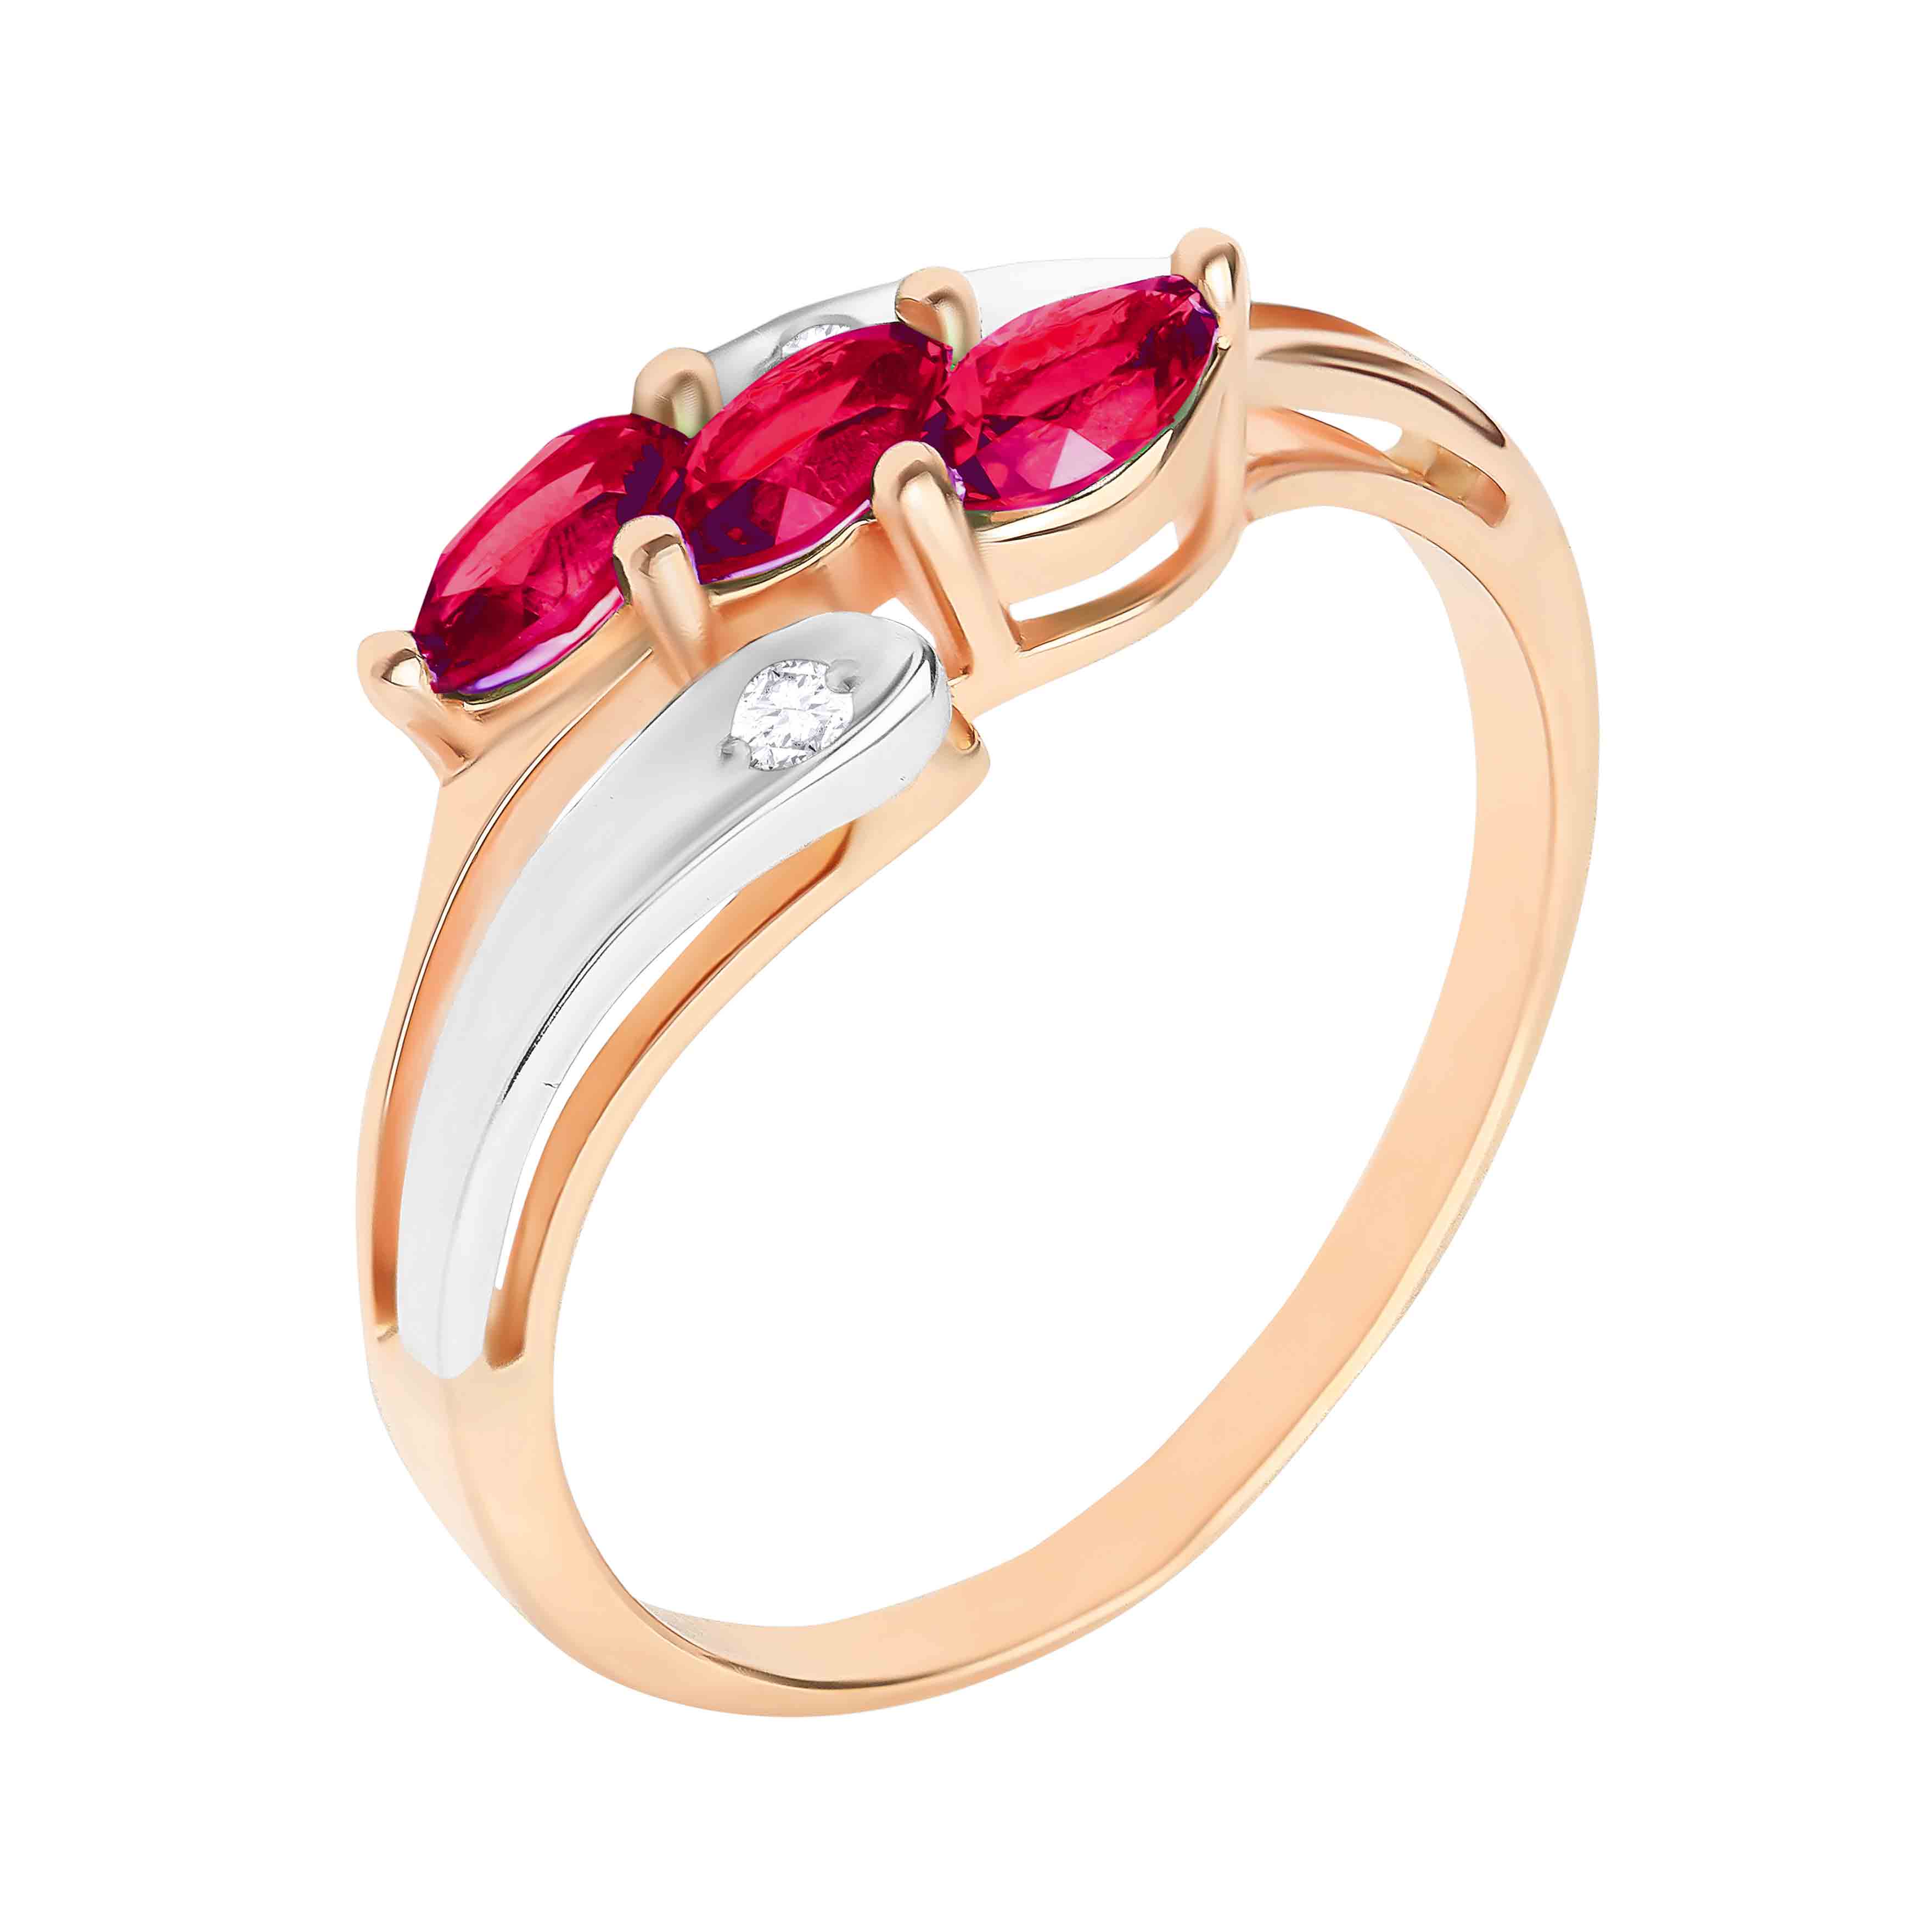 3 marquise rubies ring | Golden Flamingo